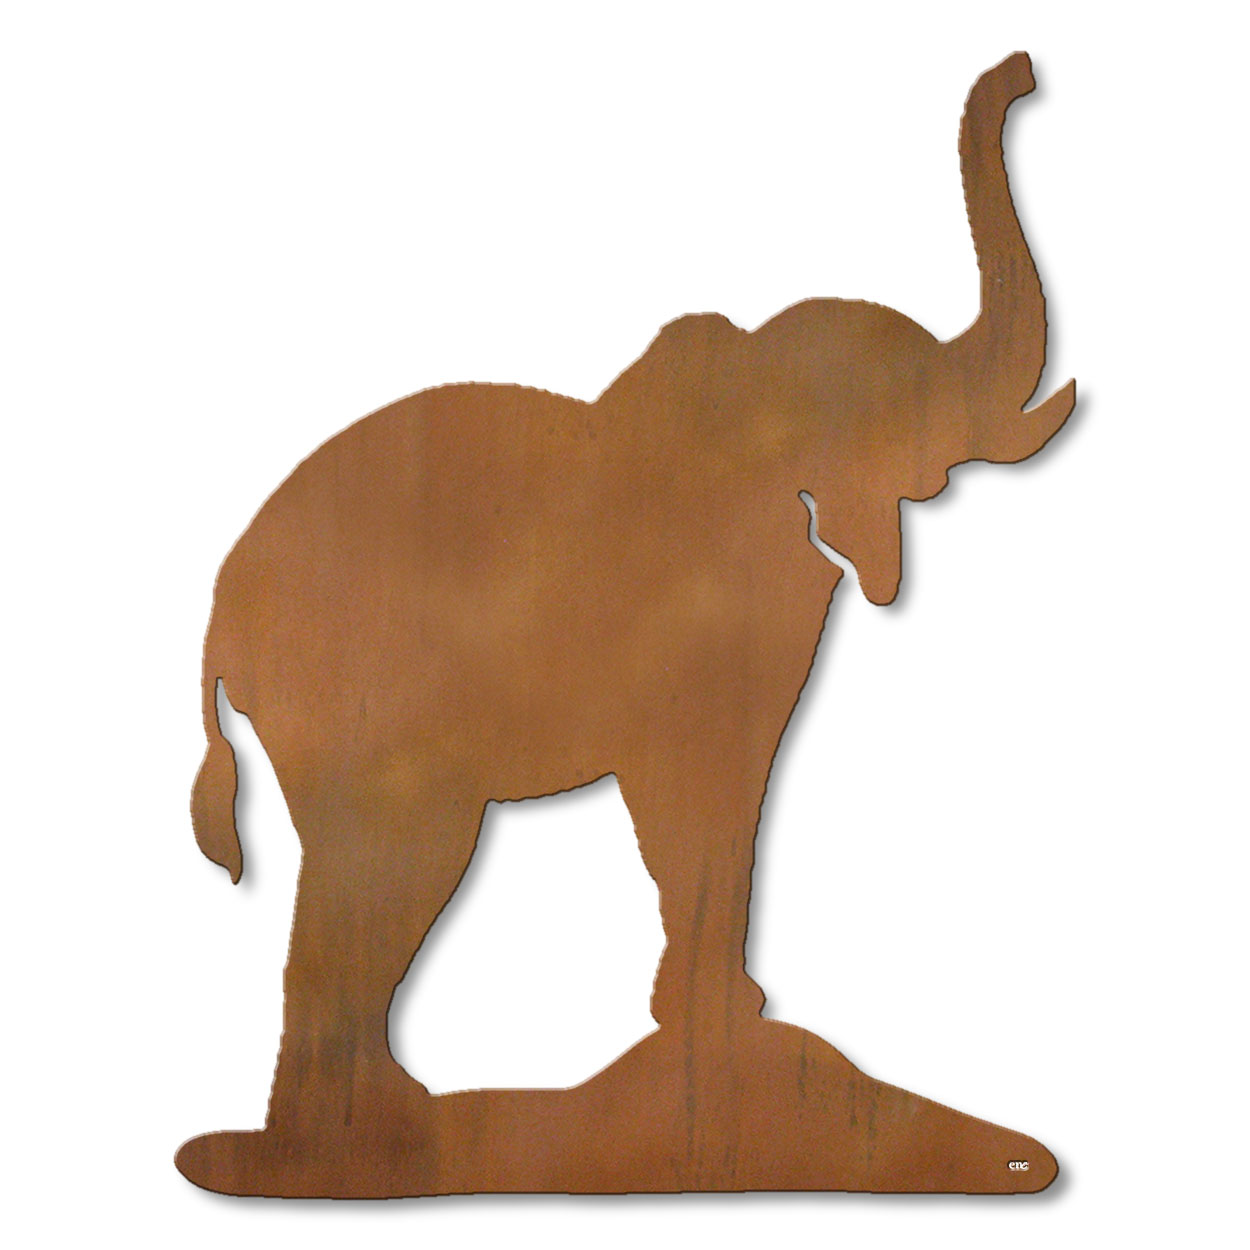 625426r - 18 or 24in Metal Wall Art - Elephant - Rust Patina